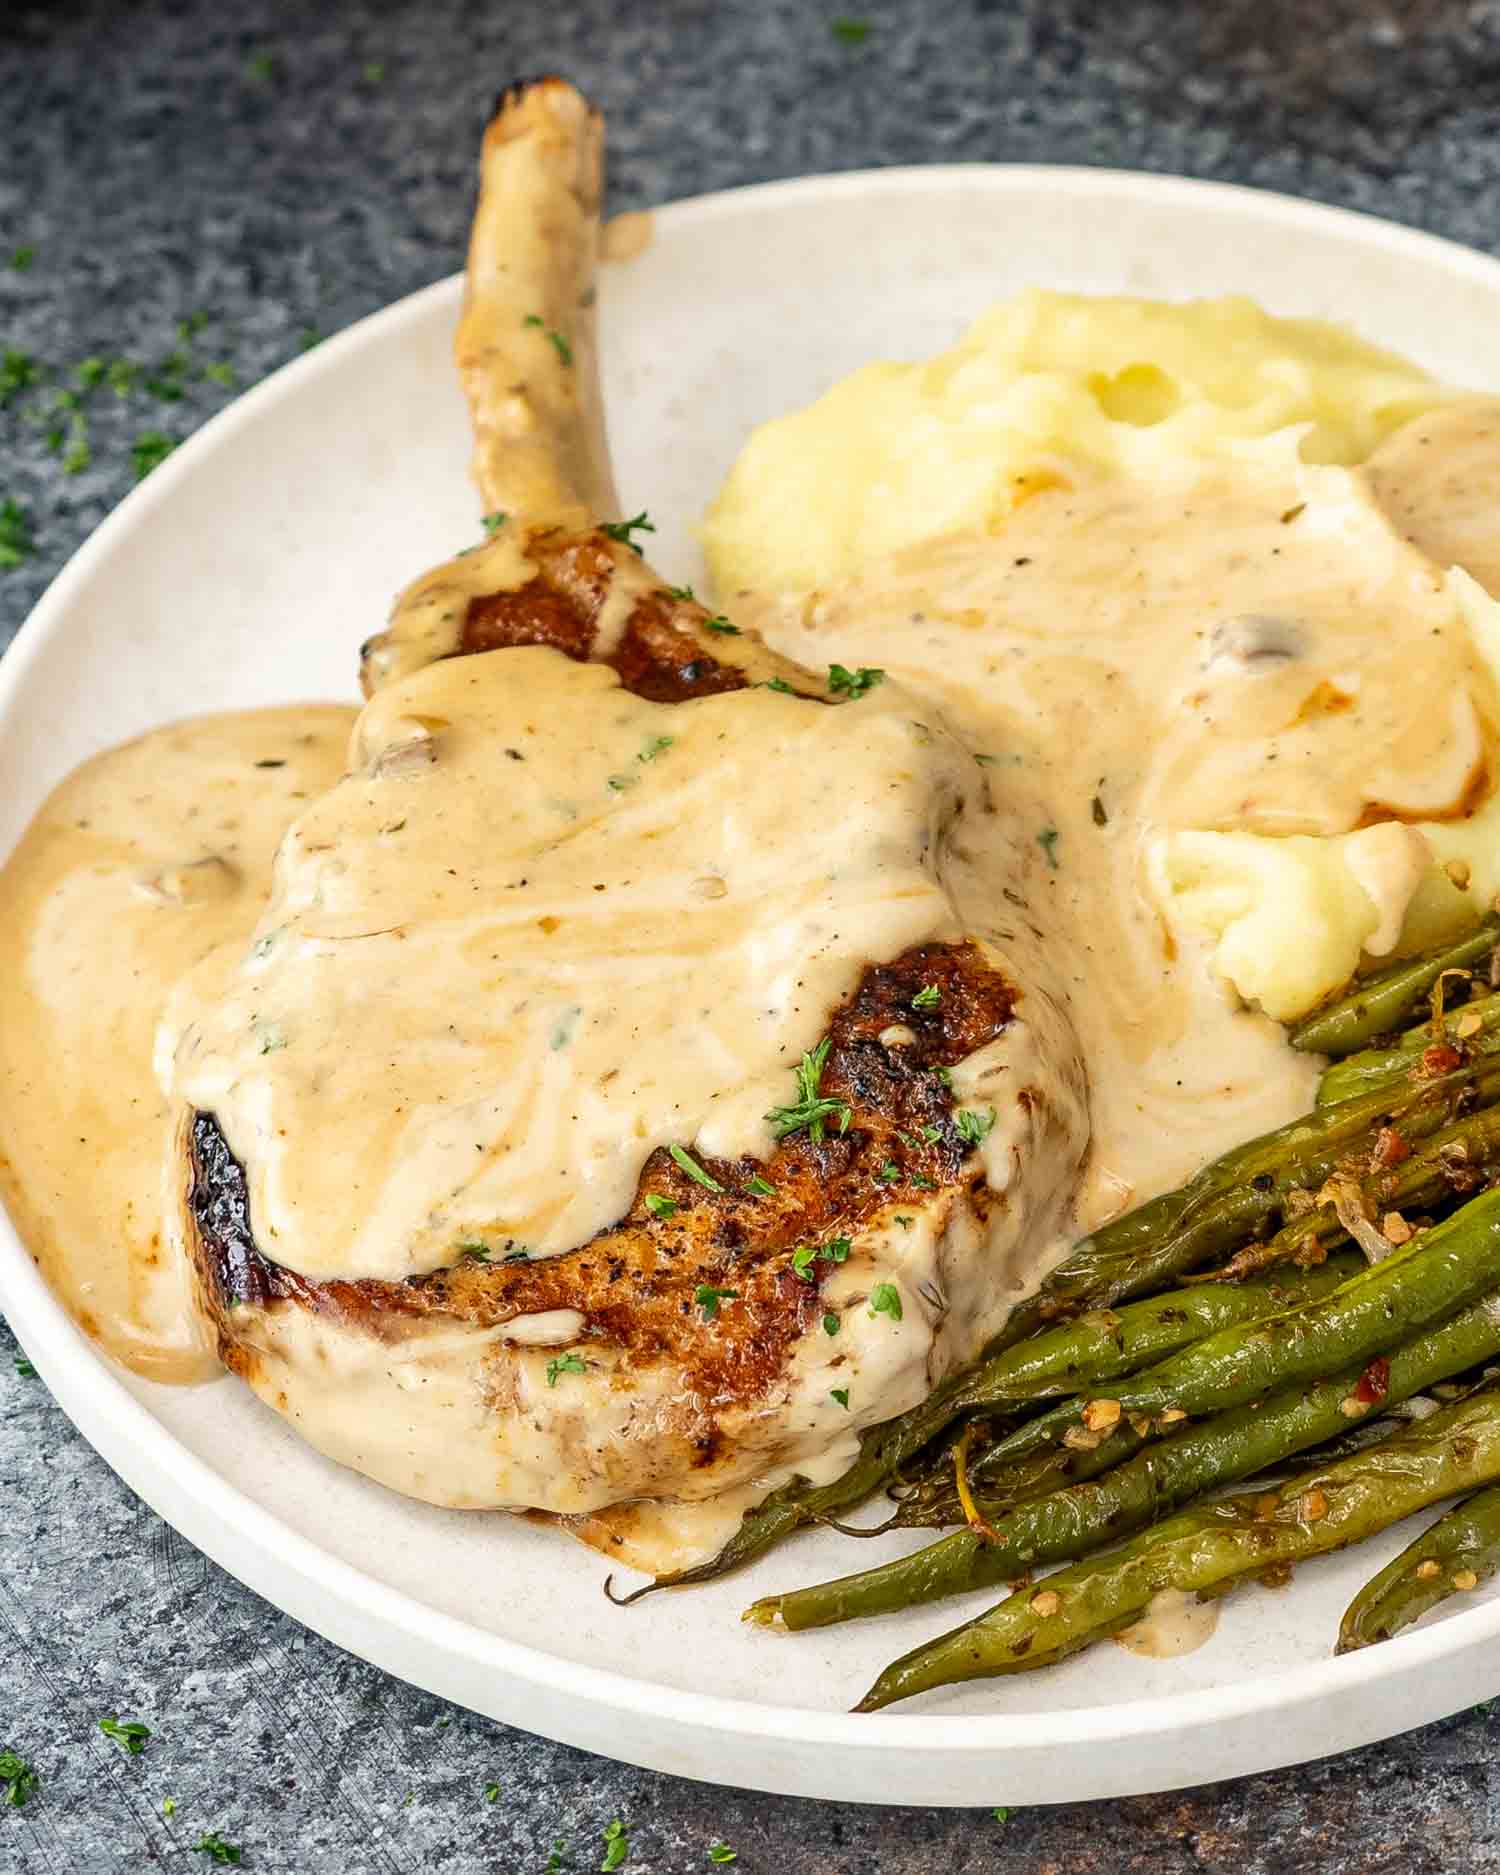 a creamy ranch pork chop along some mashed potatoes and skillet green beans on a plate.